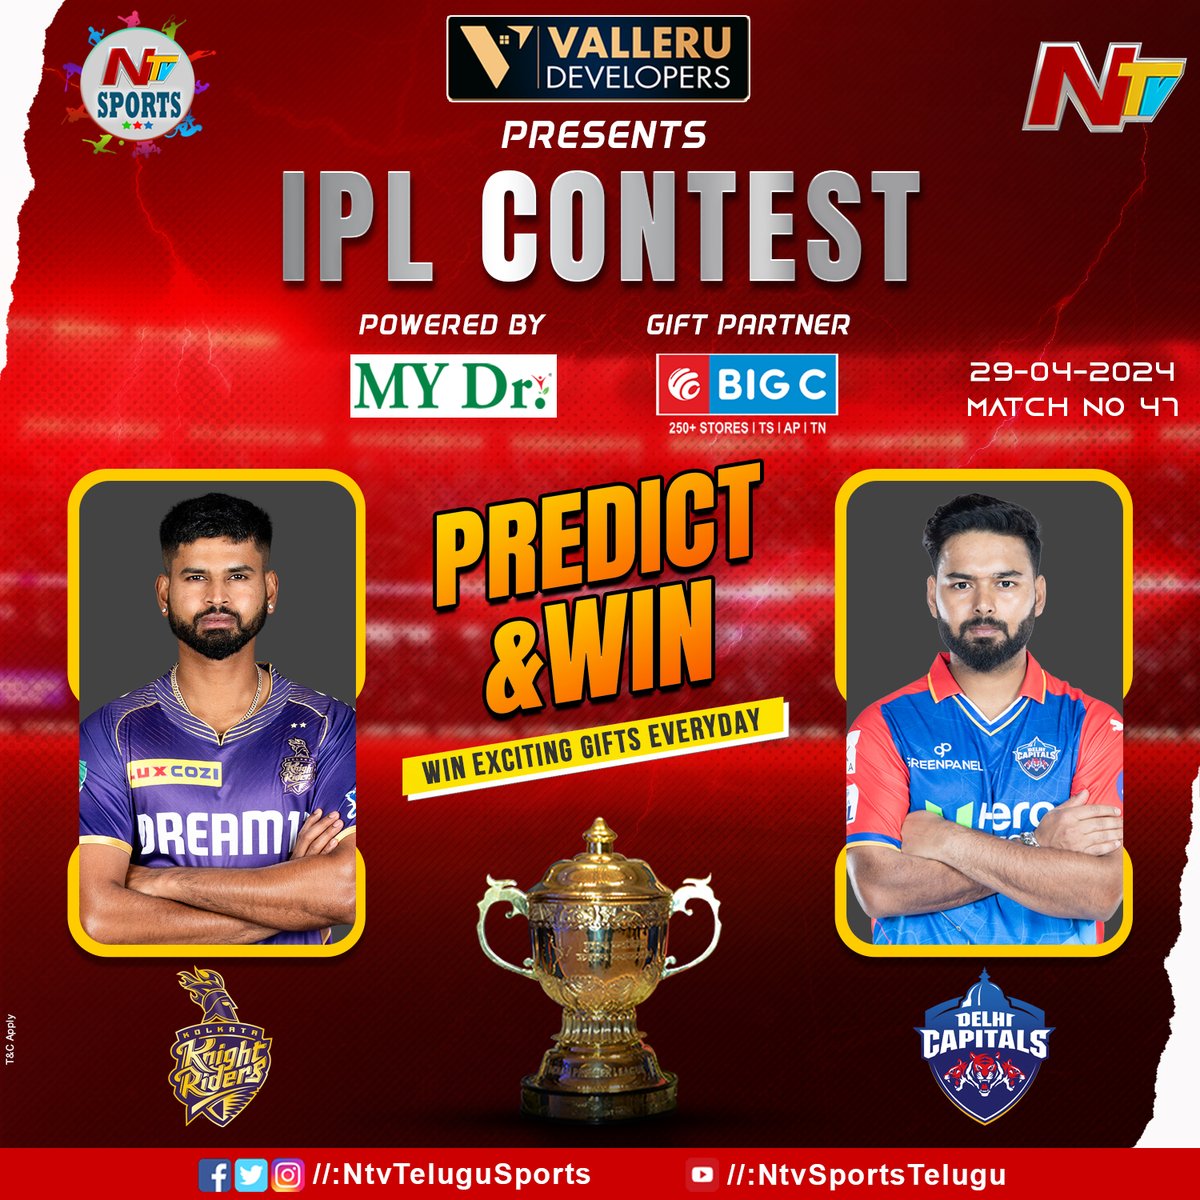 Match No - 47 : #KKRvDC

Steps to participate in this contest:

Predict the winning #IPL team in the comment section before the match starts.

Follow & Retweet the post of #NTVSports.

Winner will be picked & given surprise gifts.

#IPL2024 #KKR #DC @BigCMobilesIND #NTVTelugu